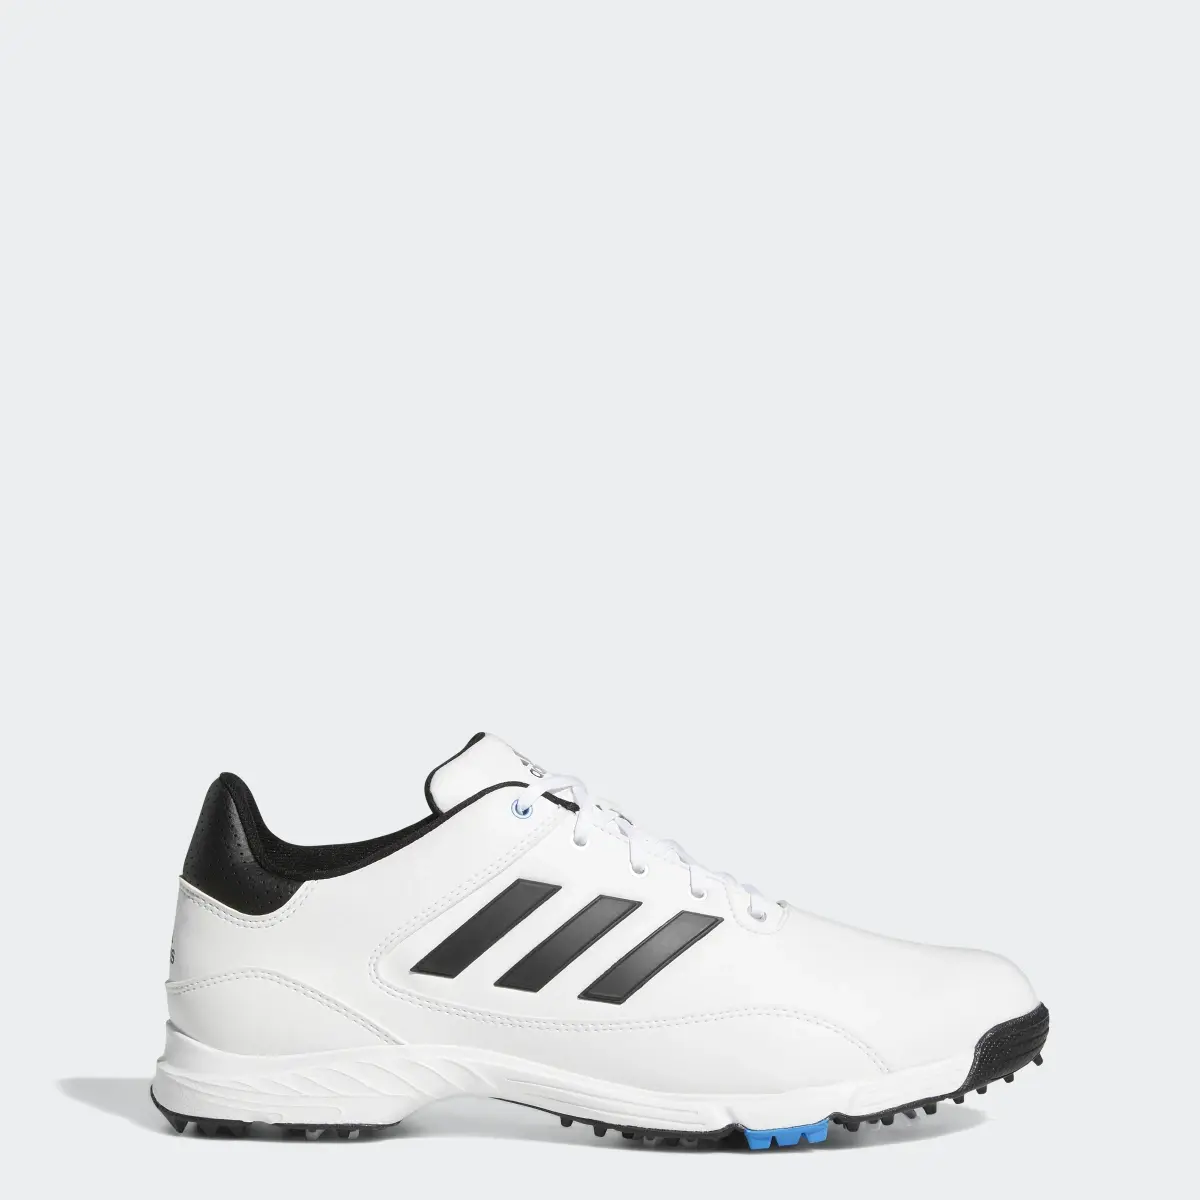 Adidas Golflite Max Wide Golf Shoes. 1